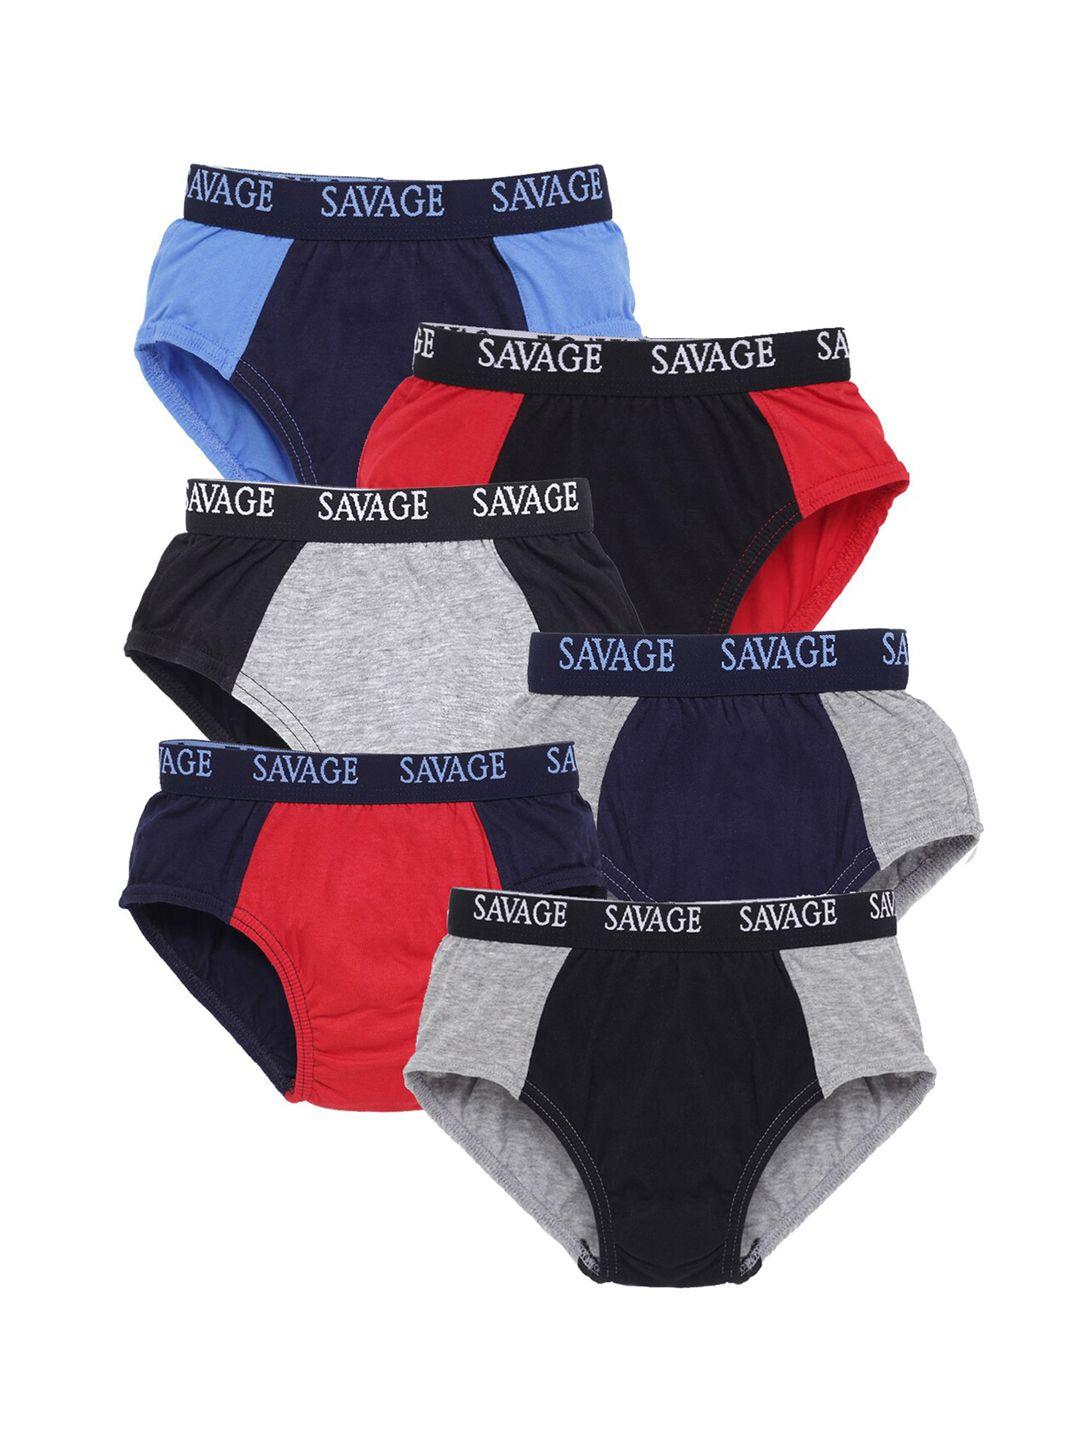 savage-pack-of-6-colourblocked-cotton-briefs